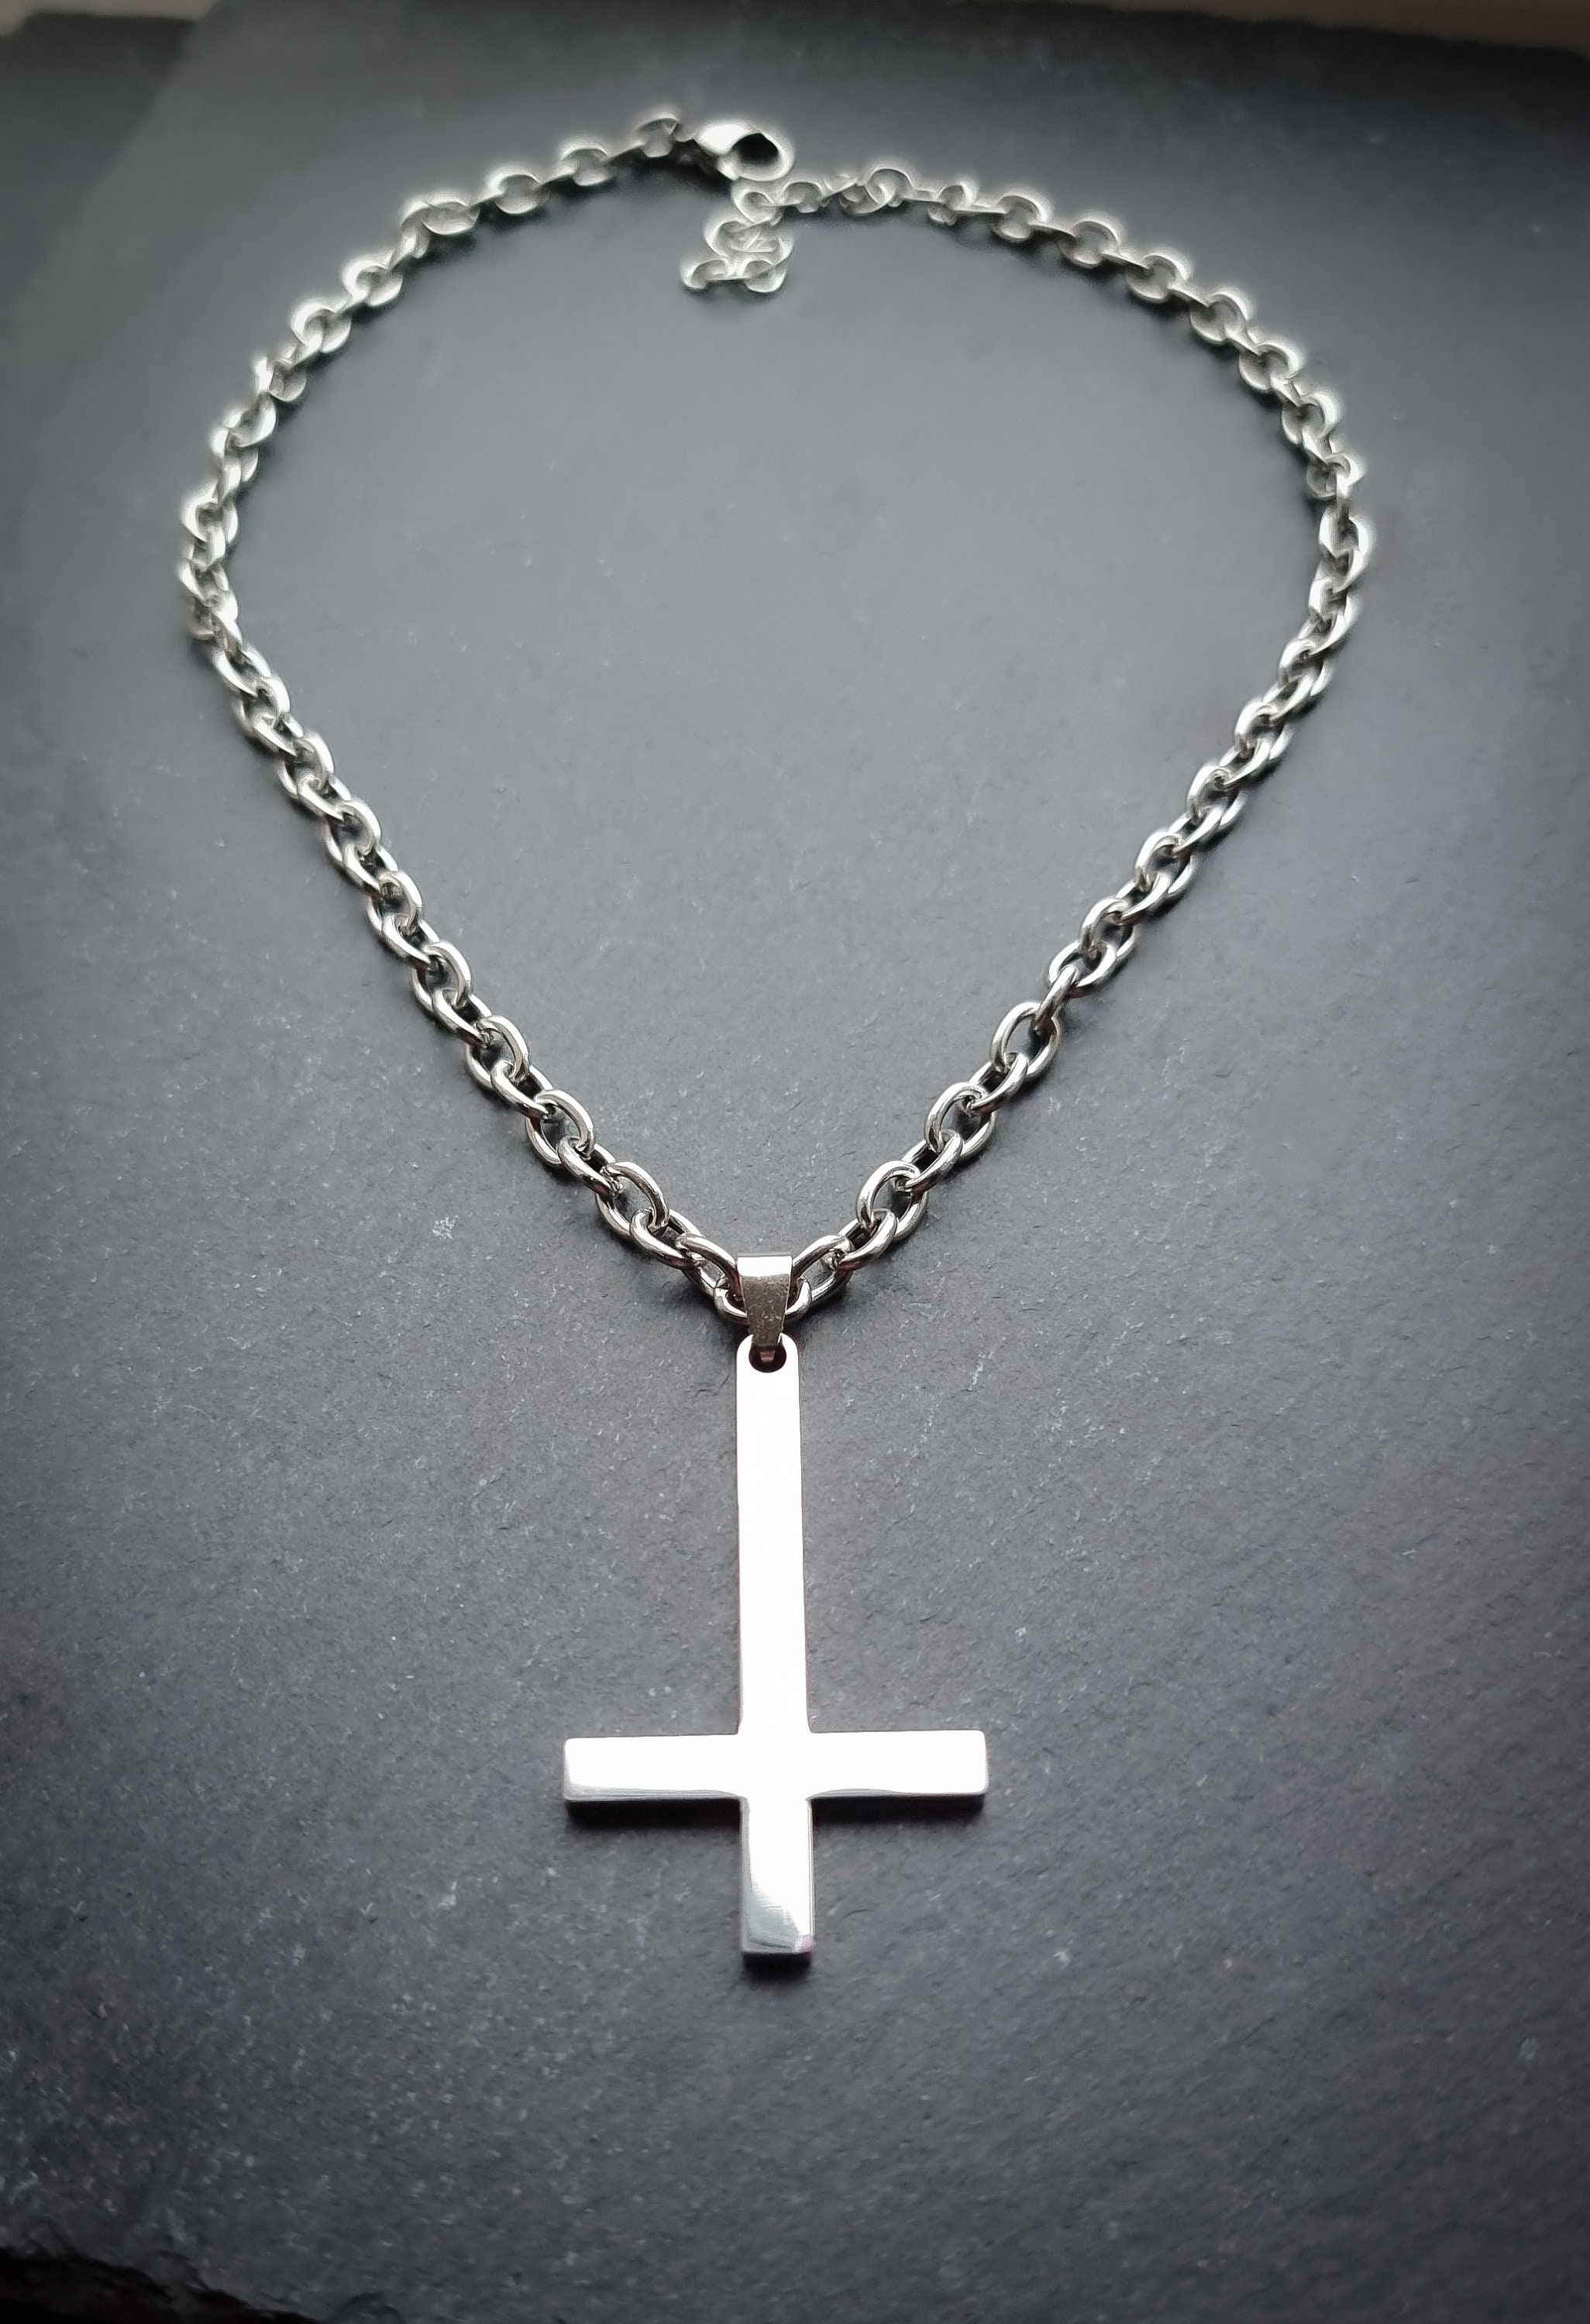 Nofade Silver Inverted Cross Necklace for Women Men, S925 Sterling Silver  Upside Down Cross Pendant with Chain 18'' Religious Jewelry